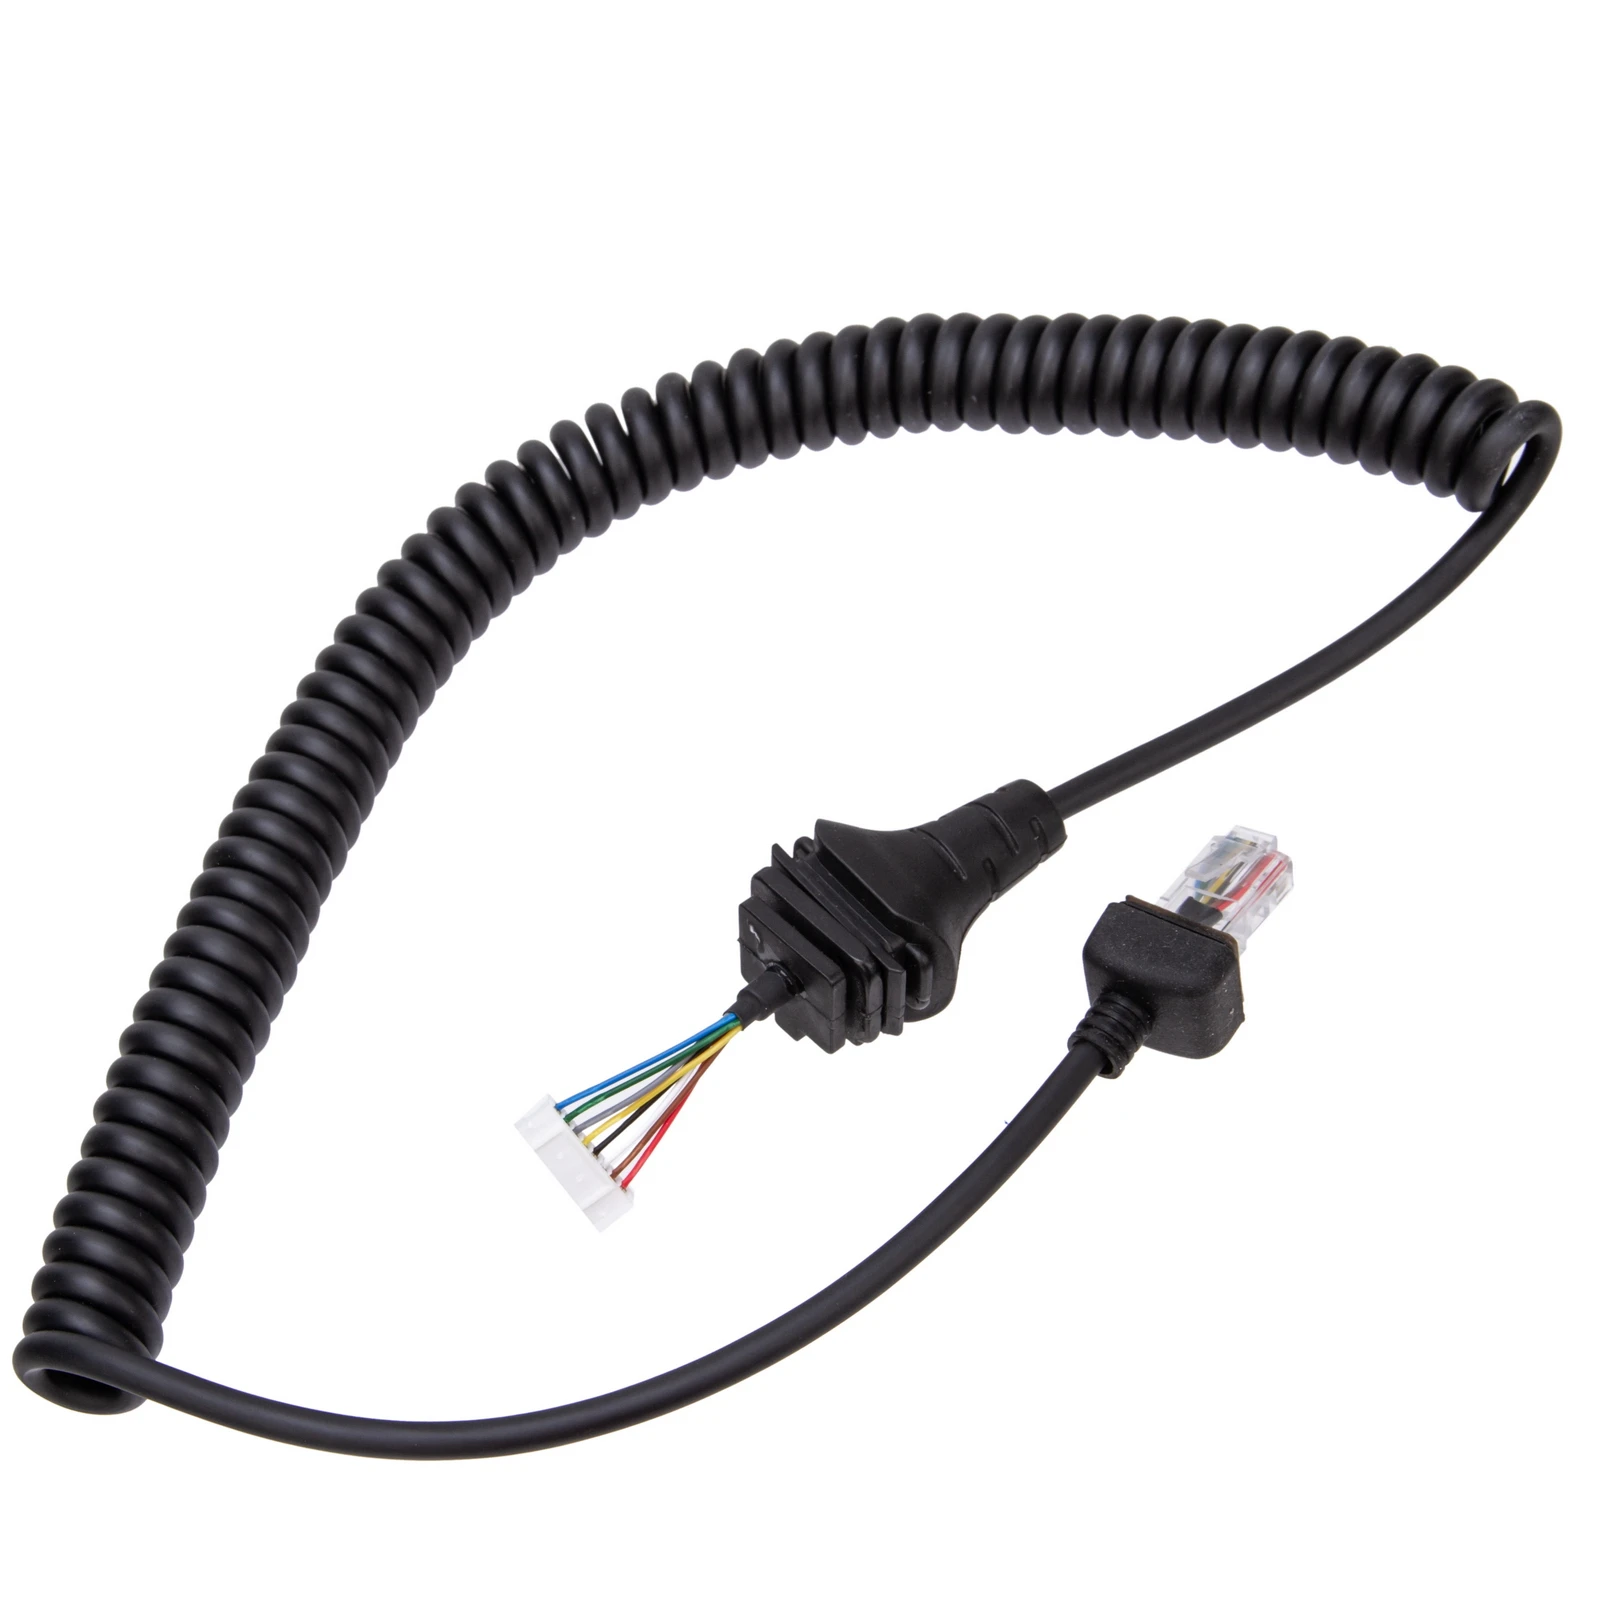 

Replacement 8 Pin HM-152 Mic HM152 154 Microphone Cable For ICOM IC-2820H IC2825E IC2200 IC3600 F221 F520 Handheld Ridao Speaker